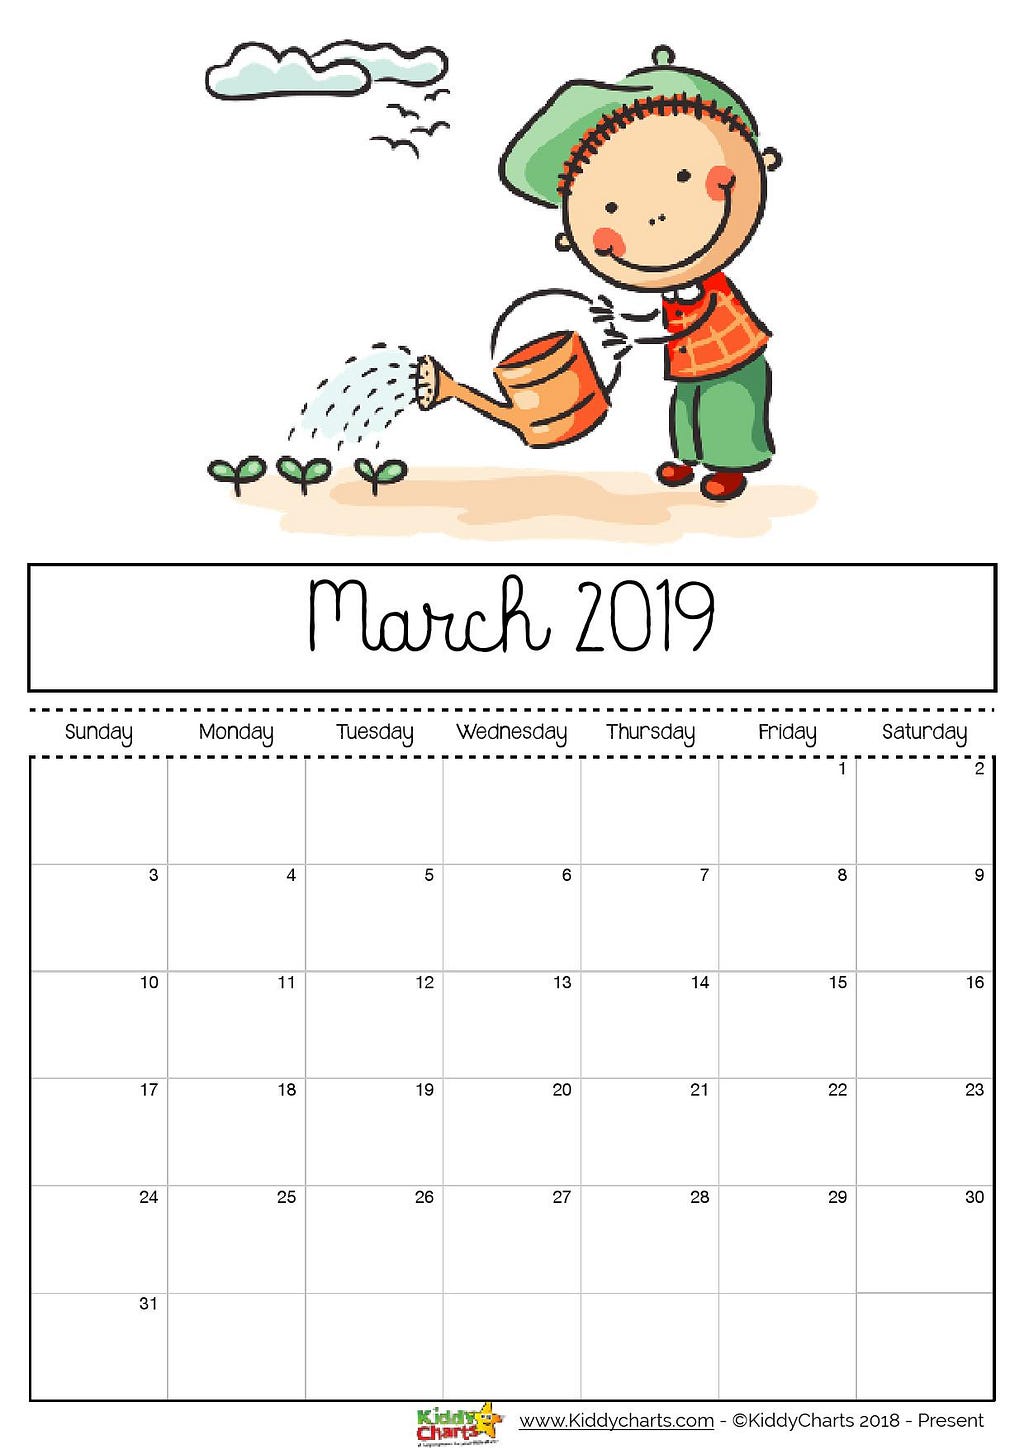 March printable 2019 calendar - girl watering her garden with a watering can. She can come and help me anyday! #printables #kidsprintables #2019calendar 